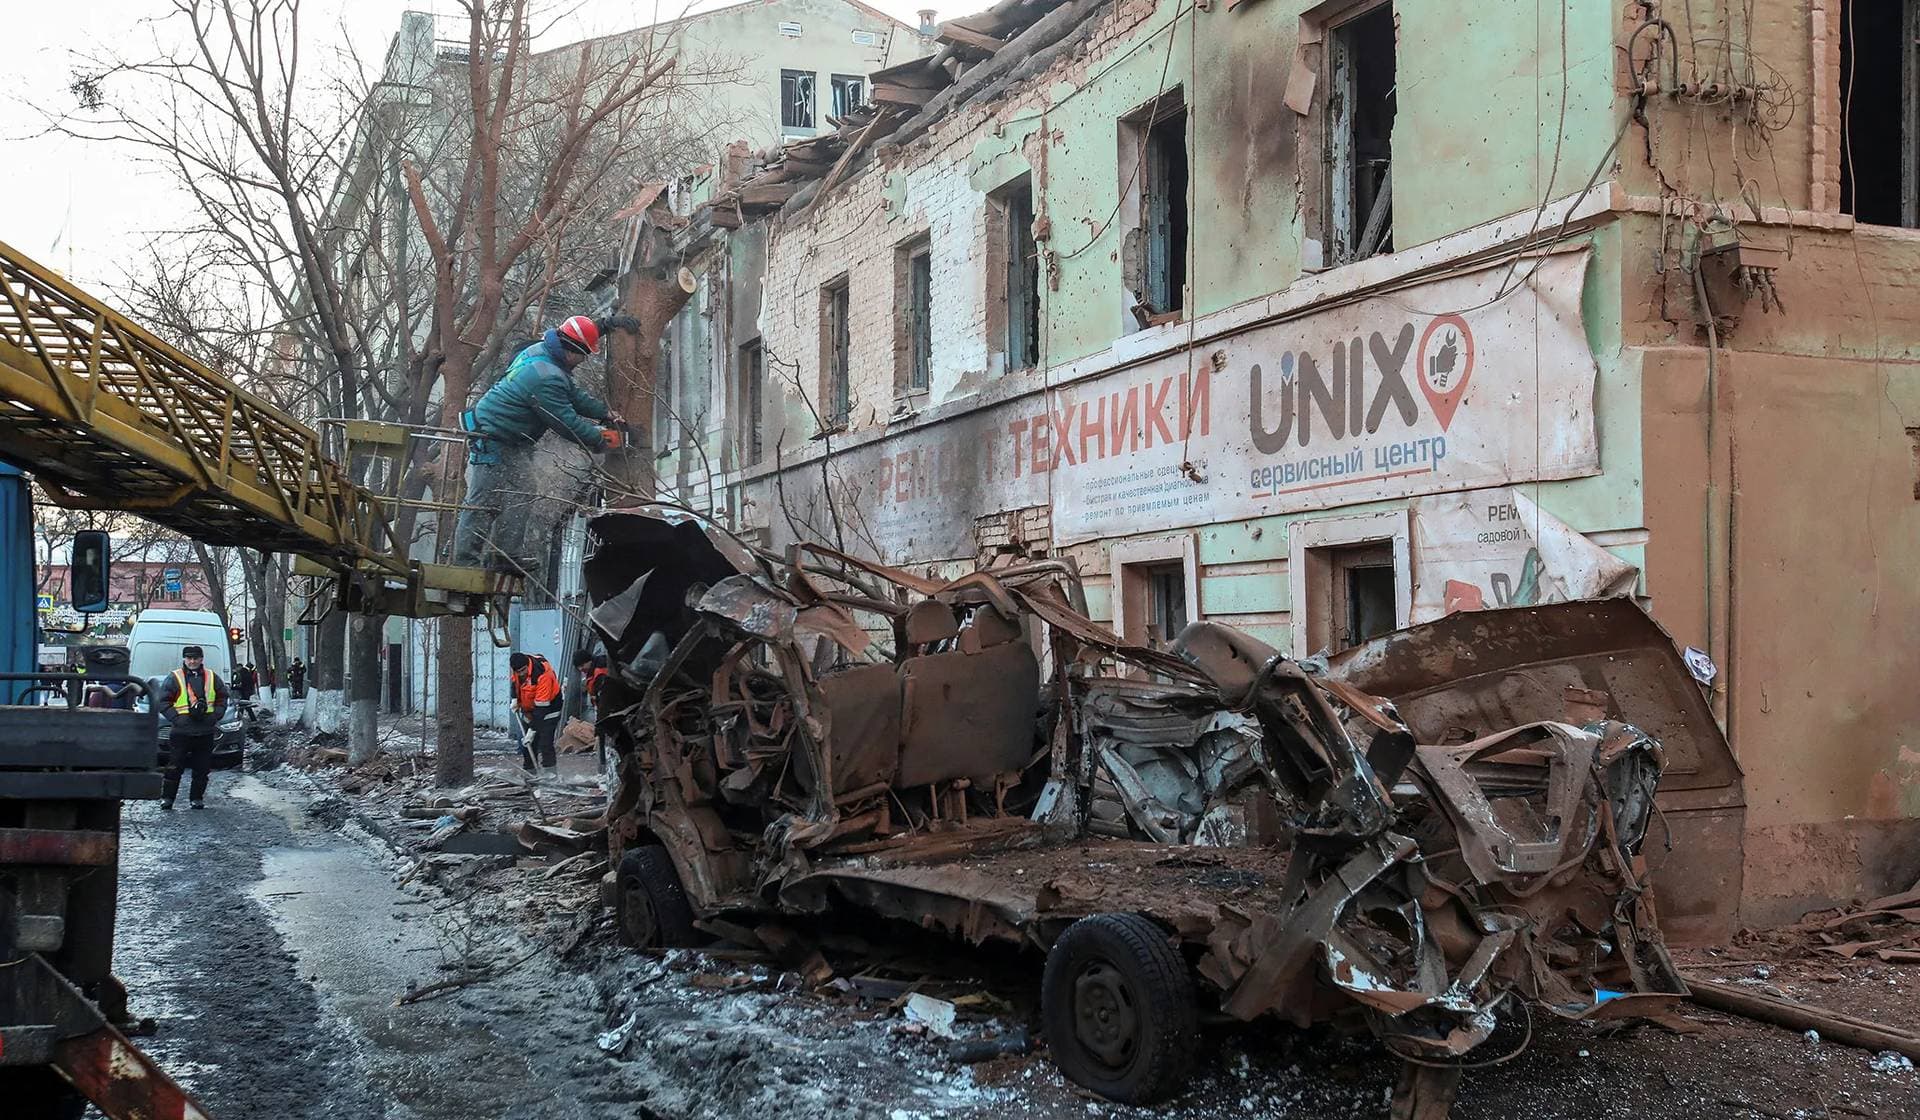 Municipal workers remove debris at a site of a Russian missile strike in central Kharkiv